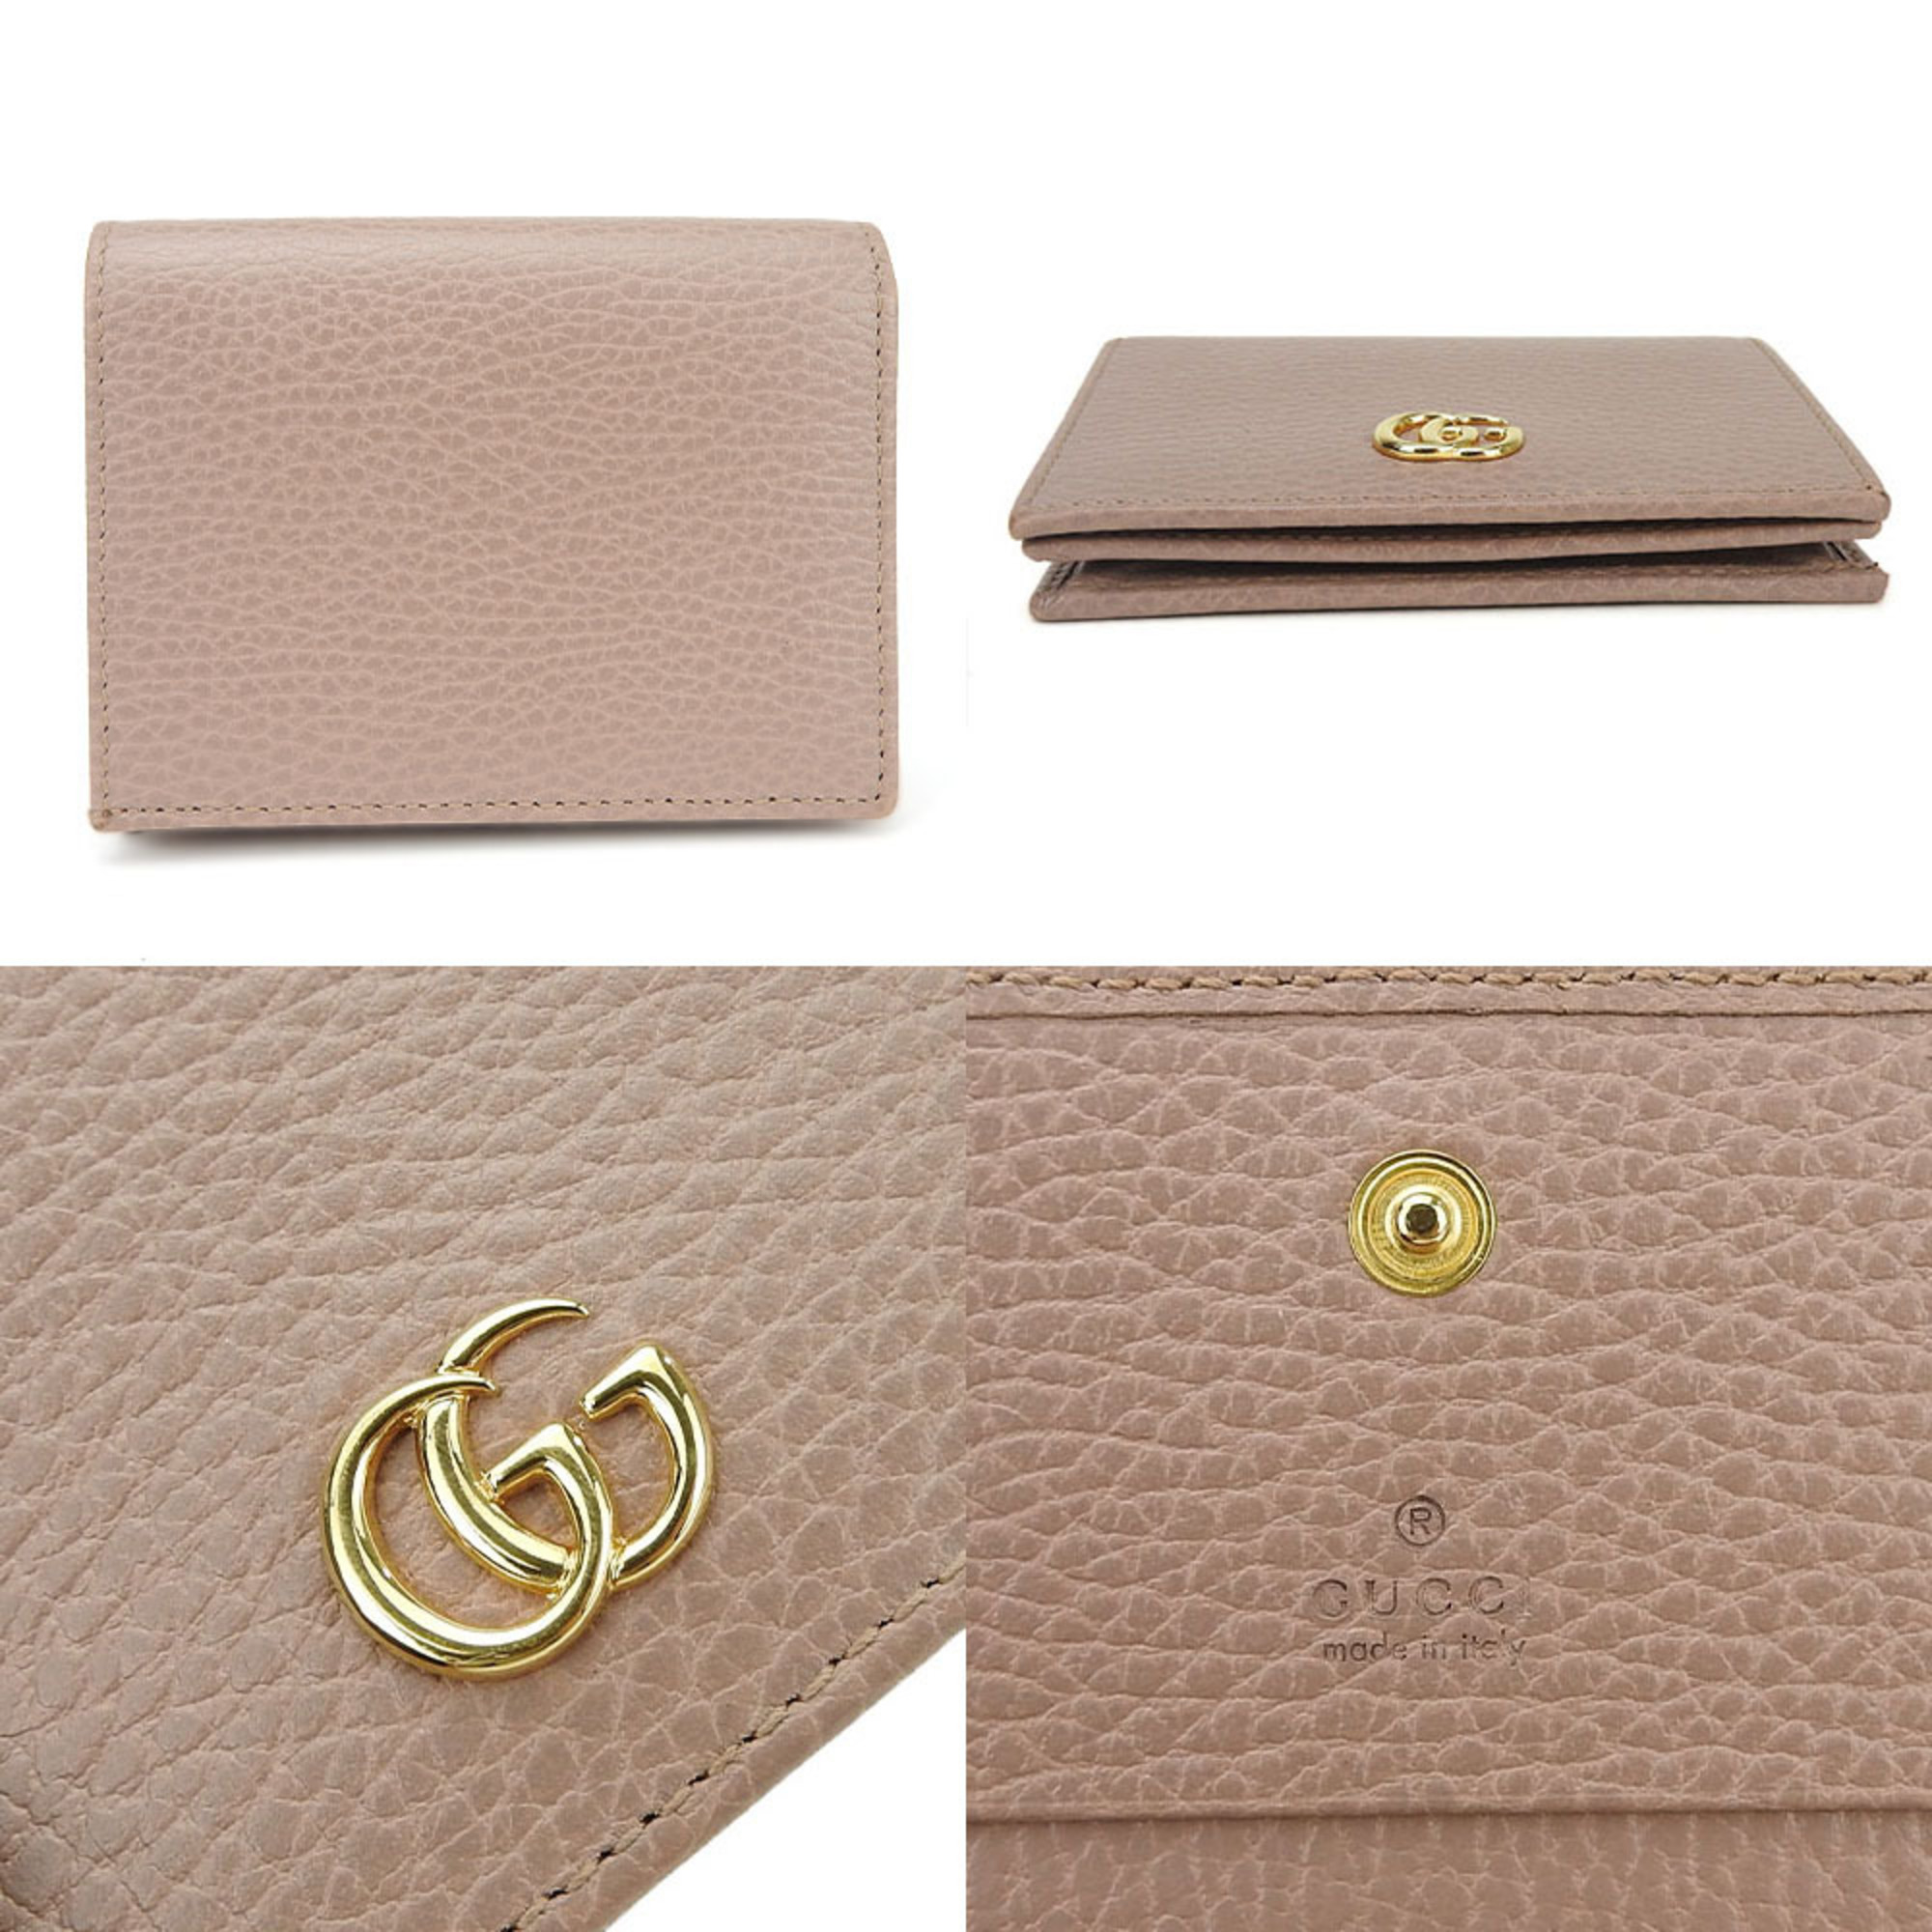 Gucci Bifold Wallet Compact 456126 GG Marmont Beige Accessories Women's GUCCI Leather beige gold